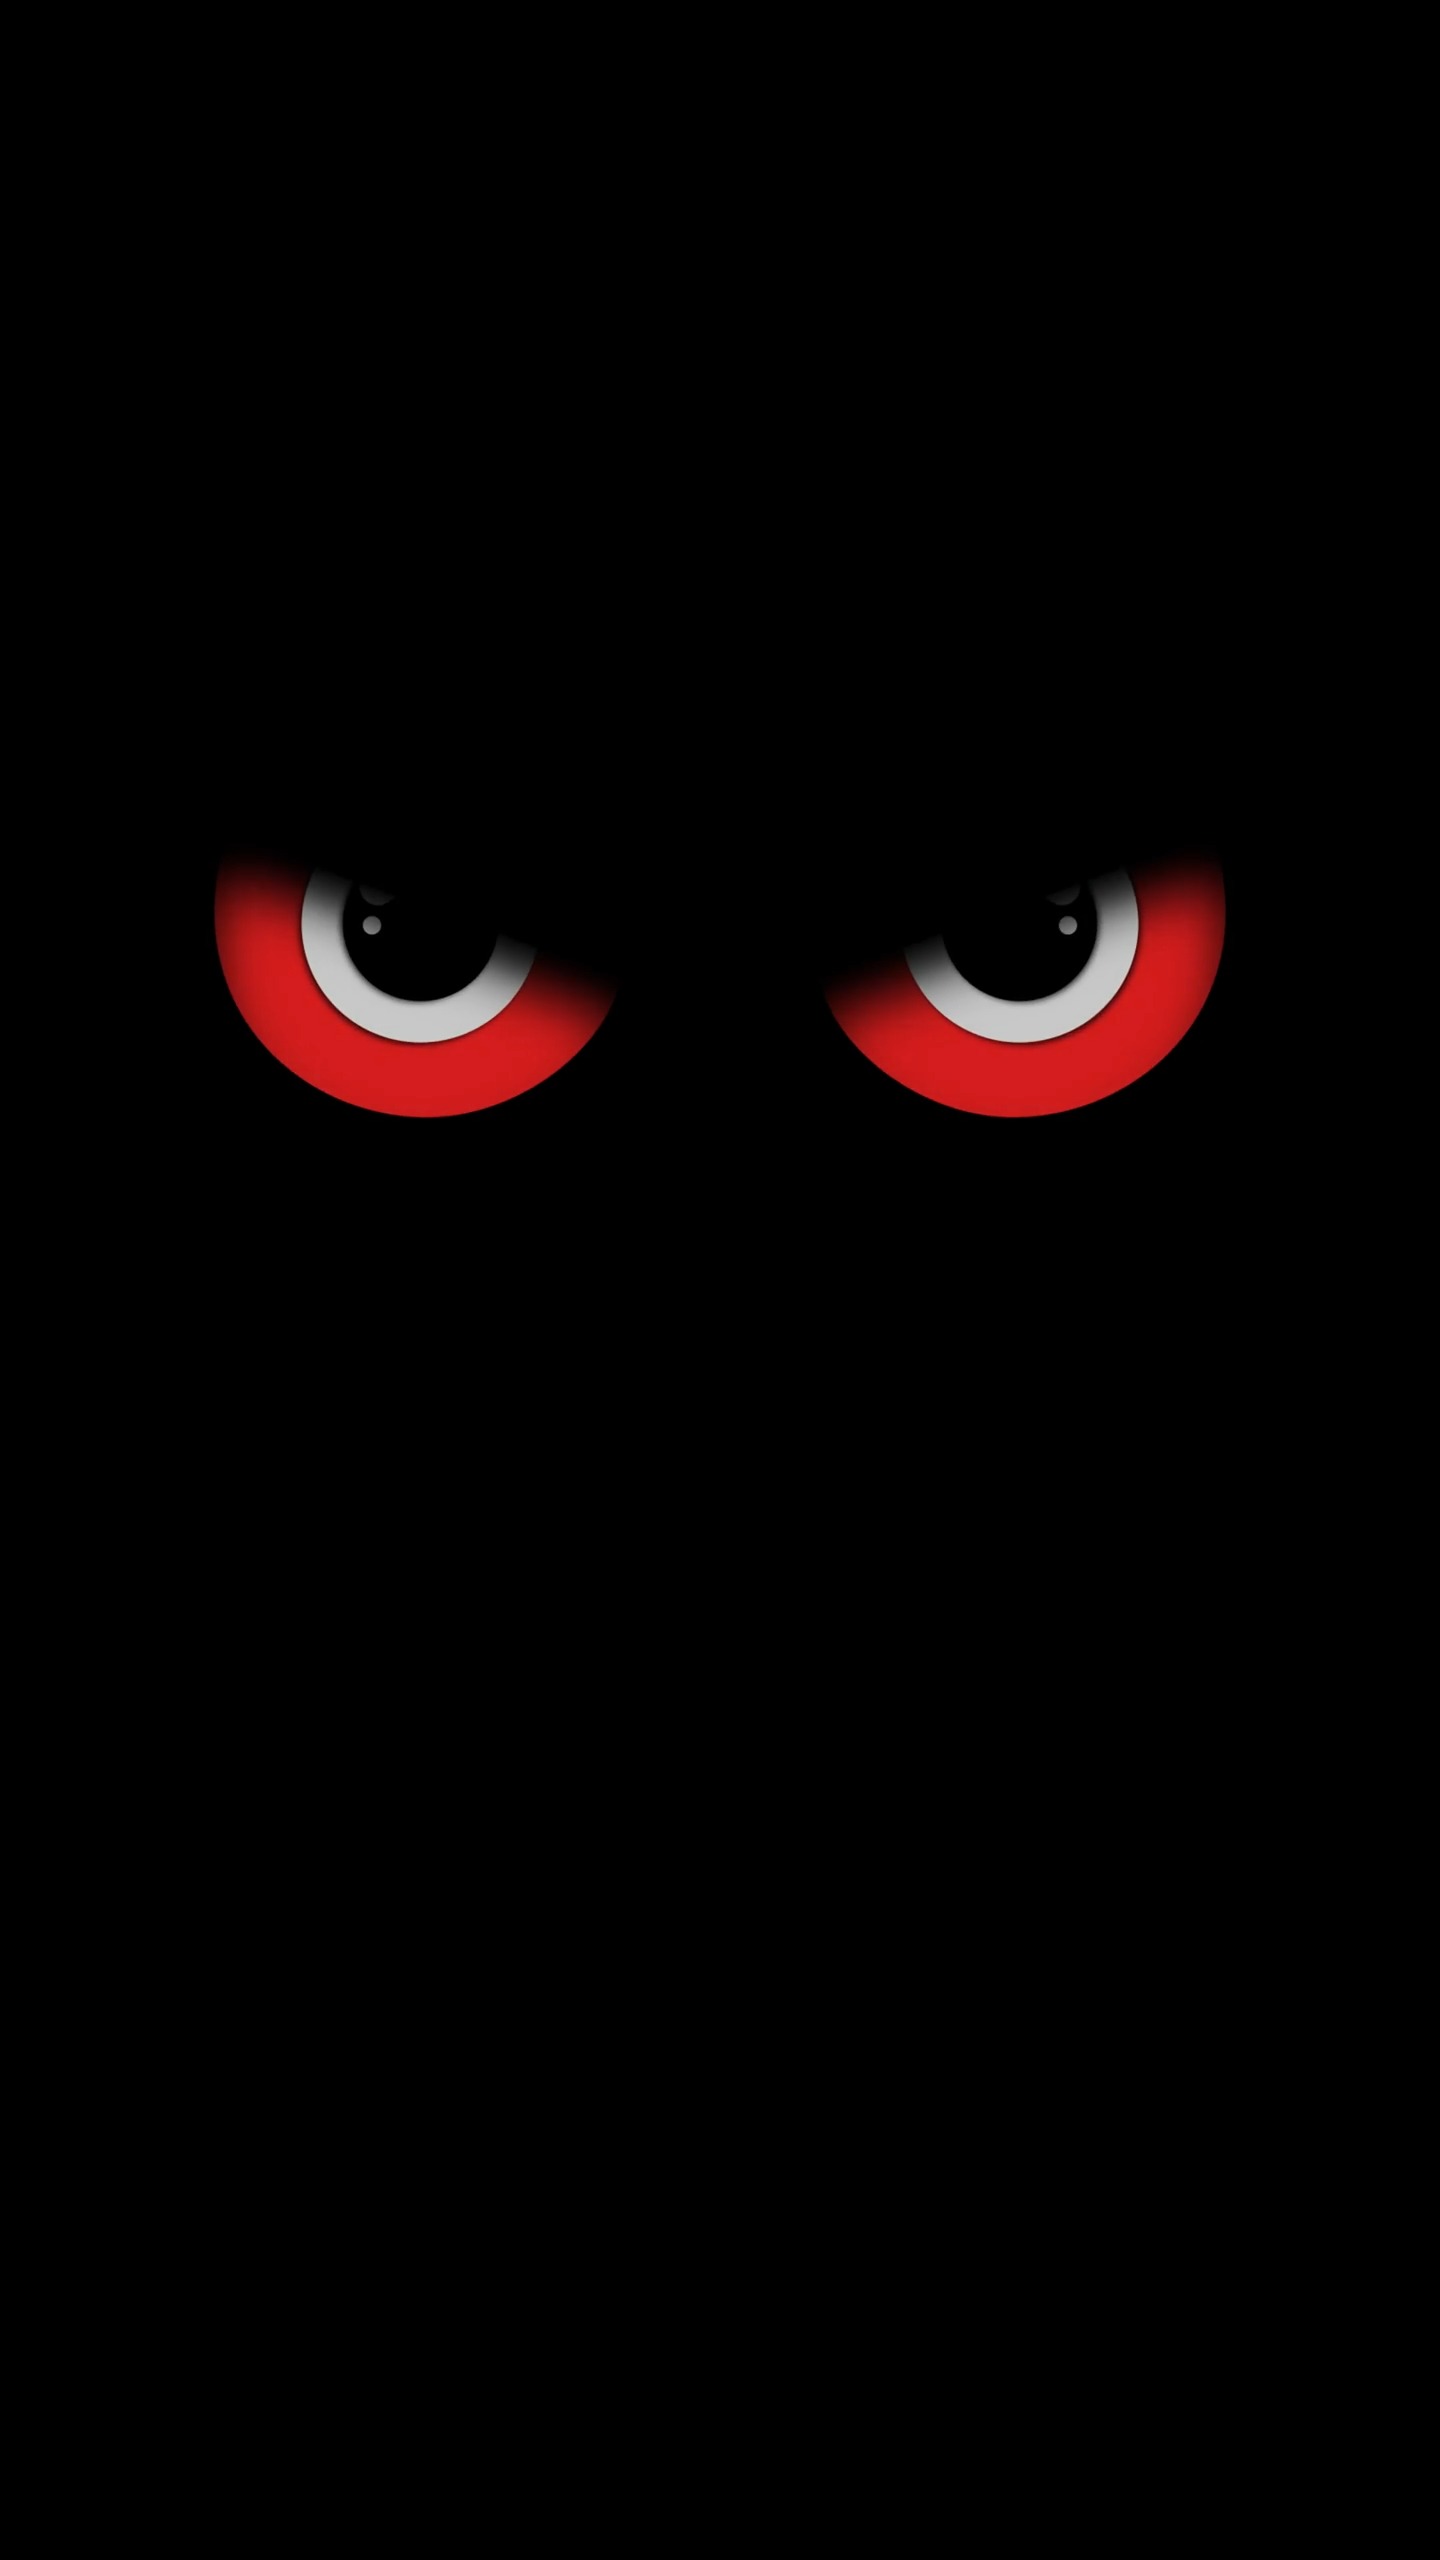 thumb for Amoled Red Eyes Live Wallpaper